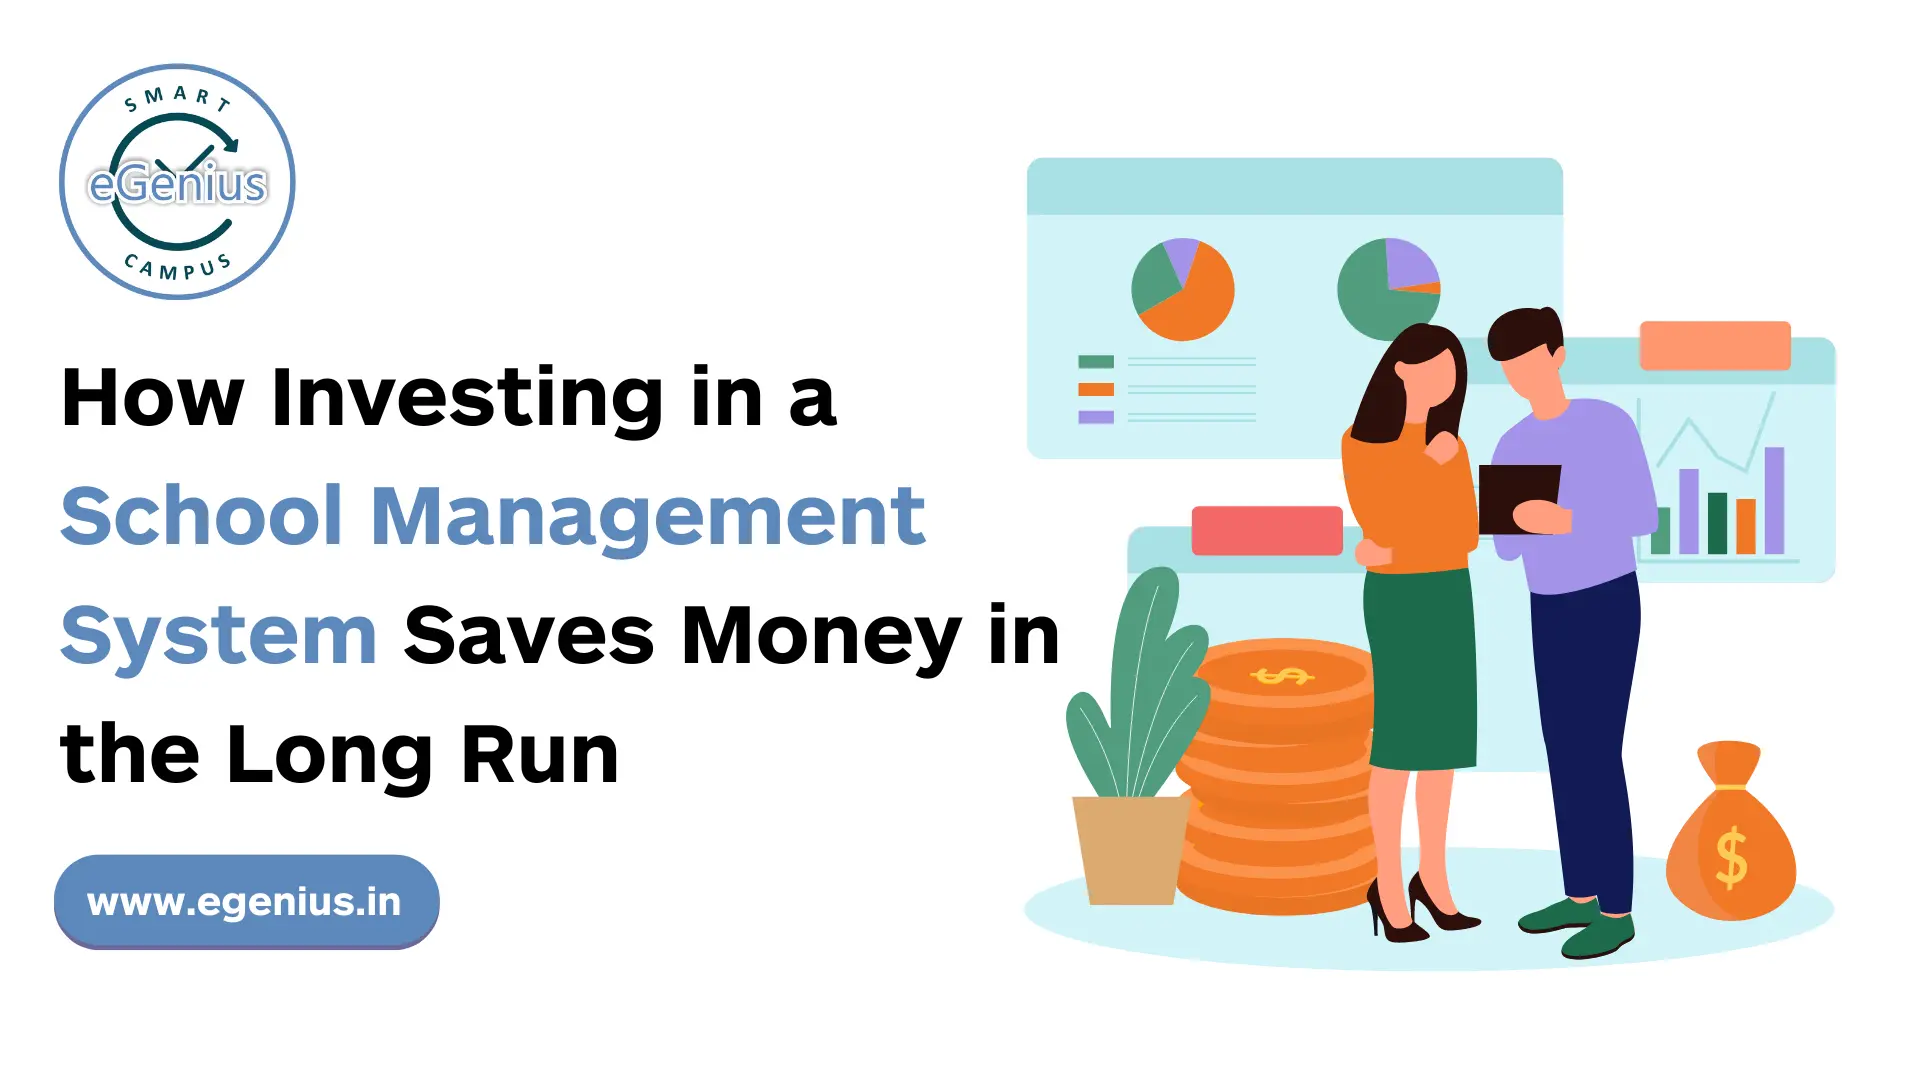 How Investing in a School Management System Saves Money in the Long Run